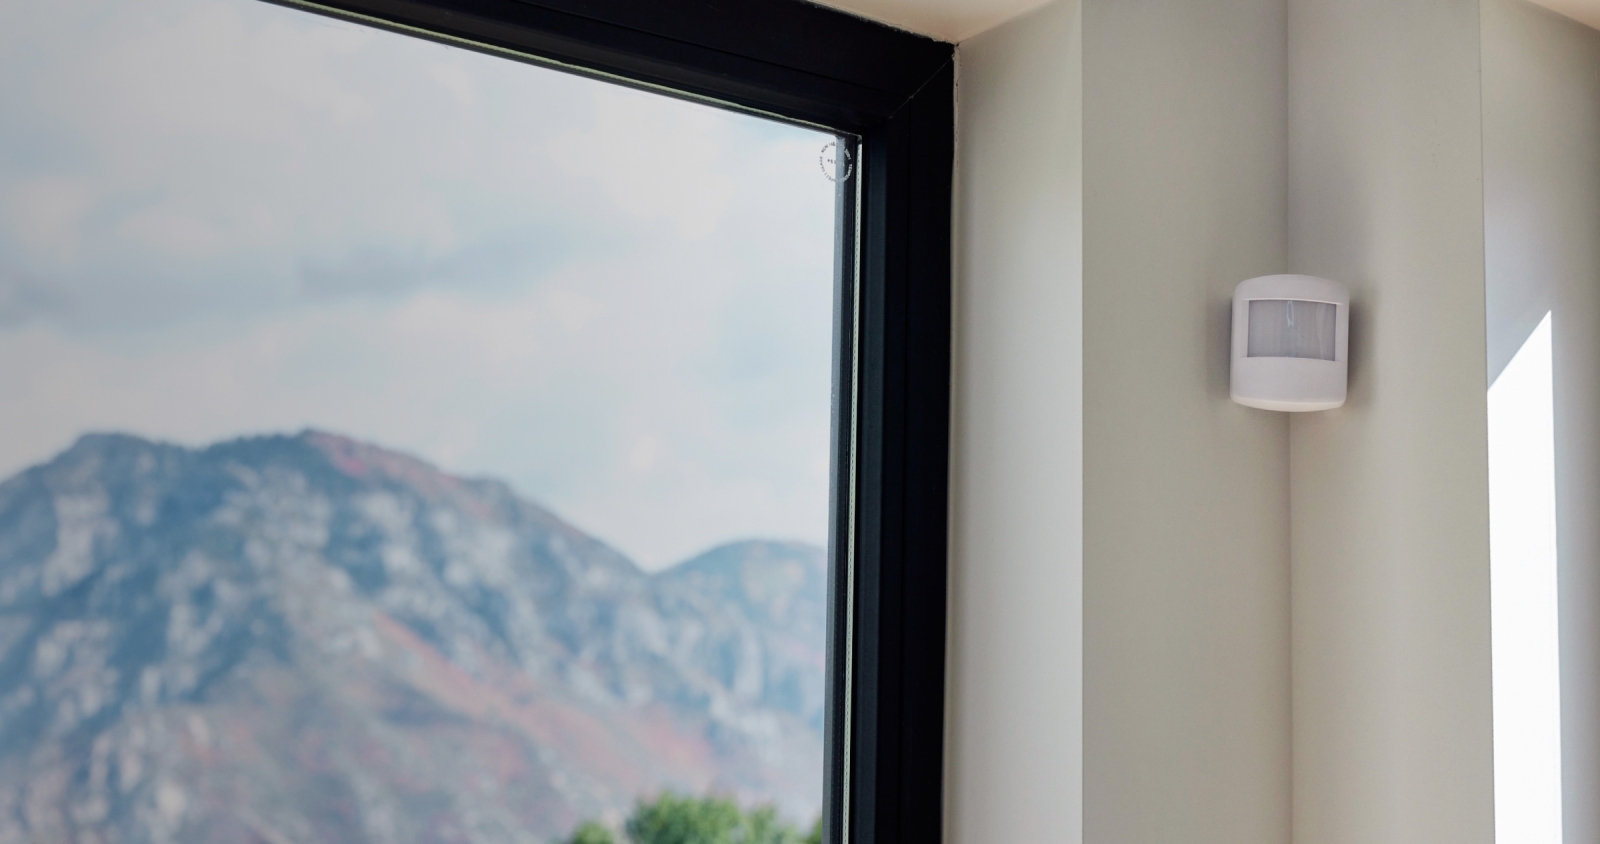 Vivint Motion Sensor Installed and view of mountains outside window